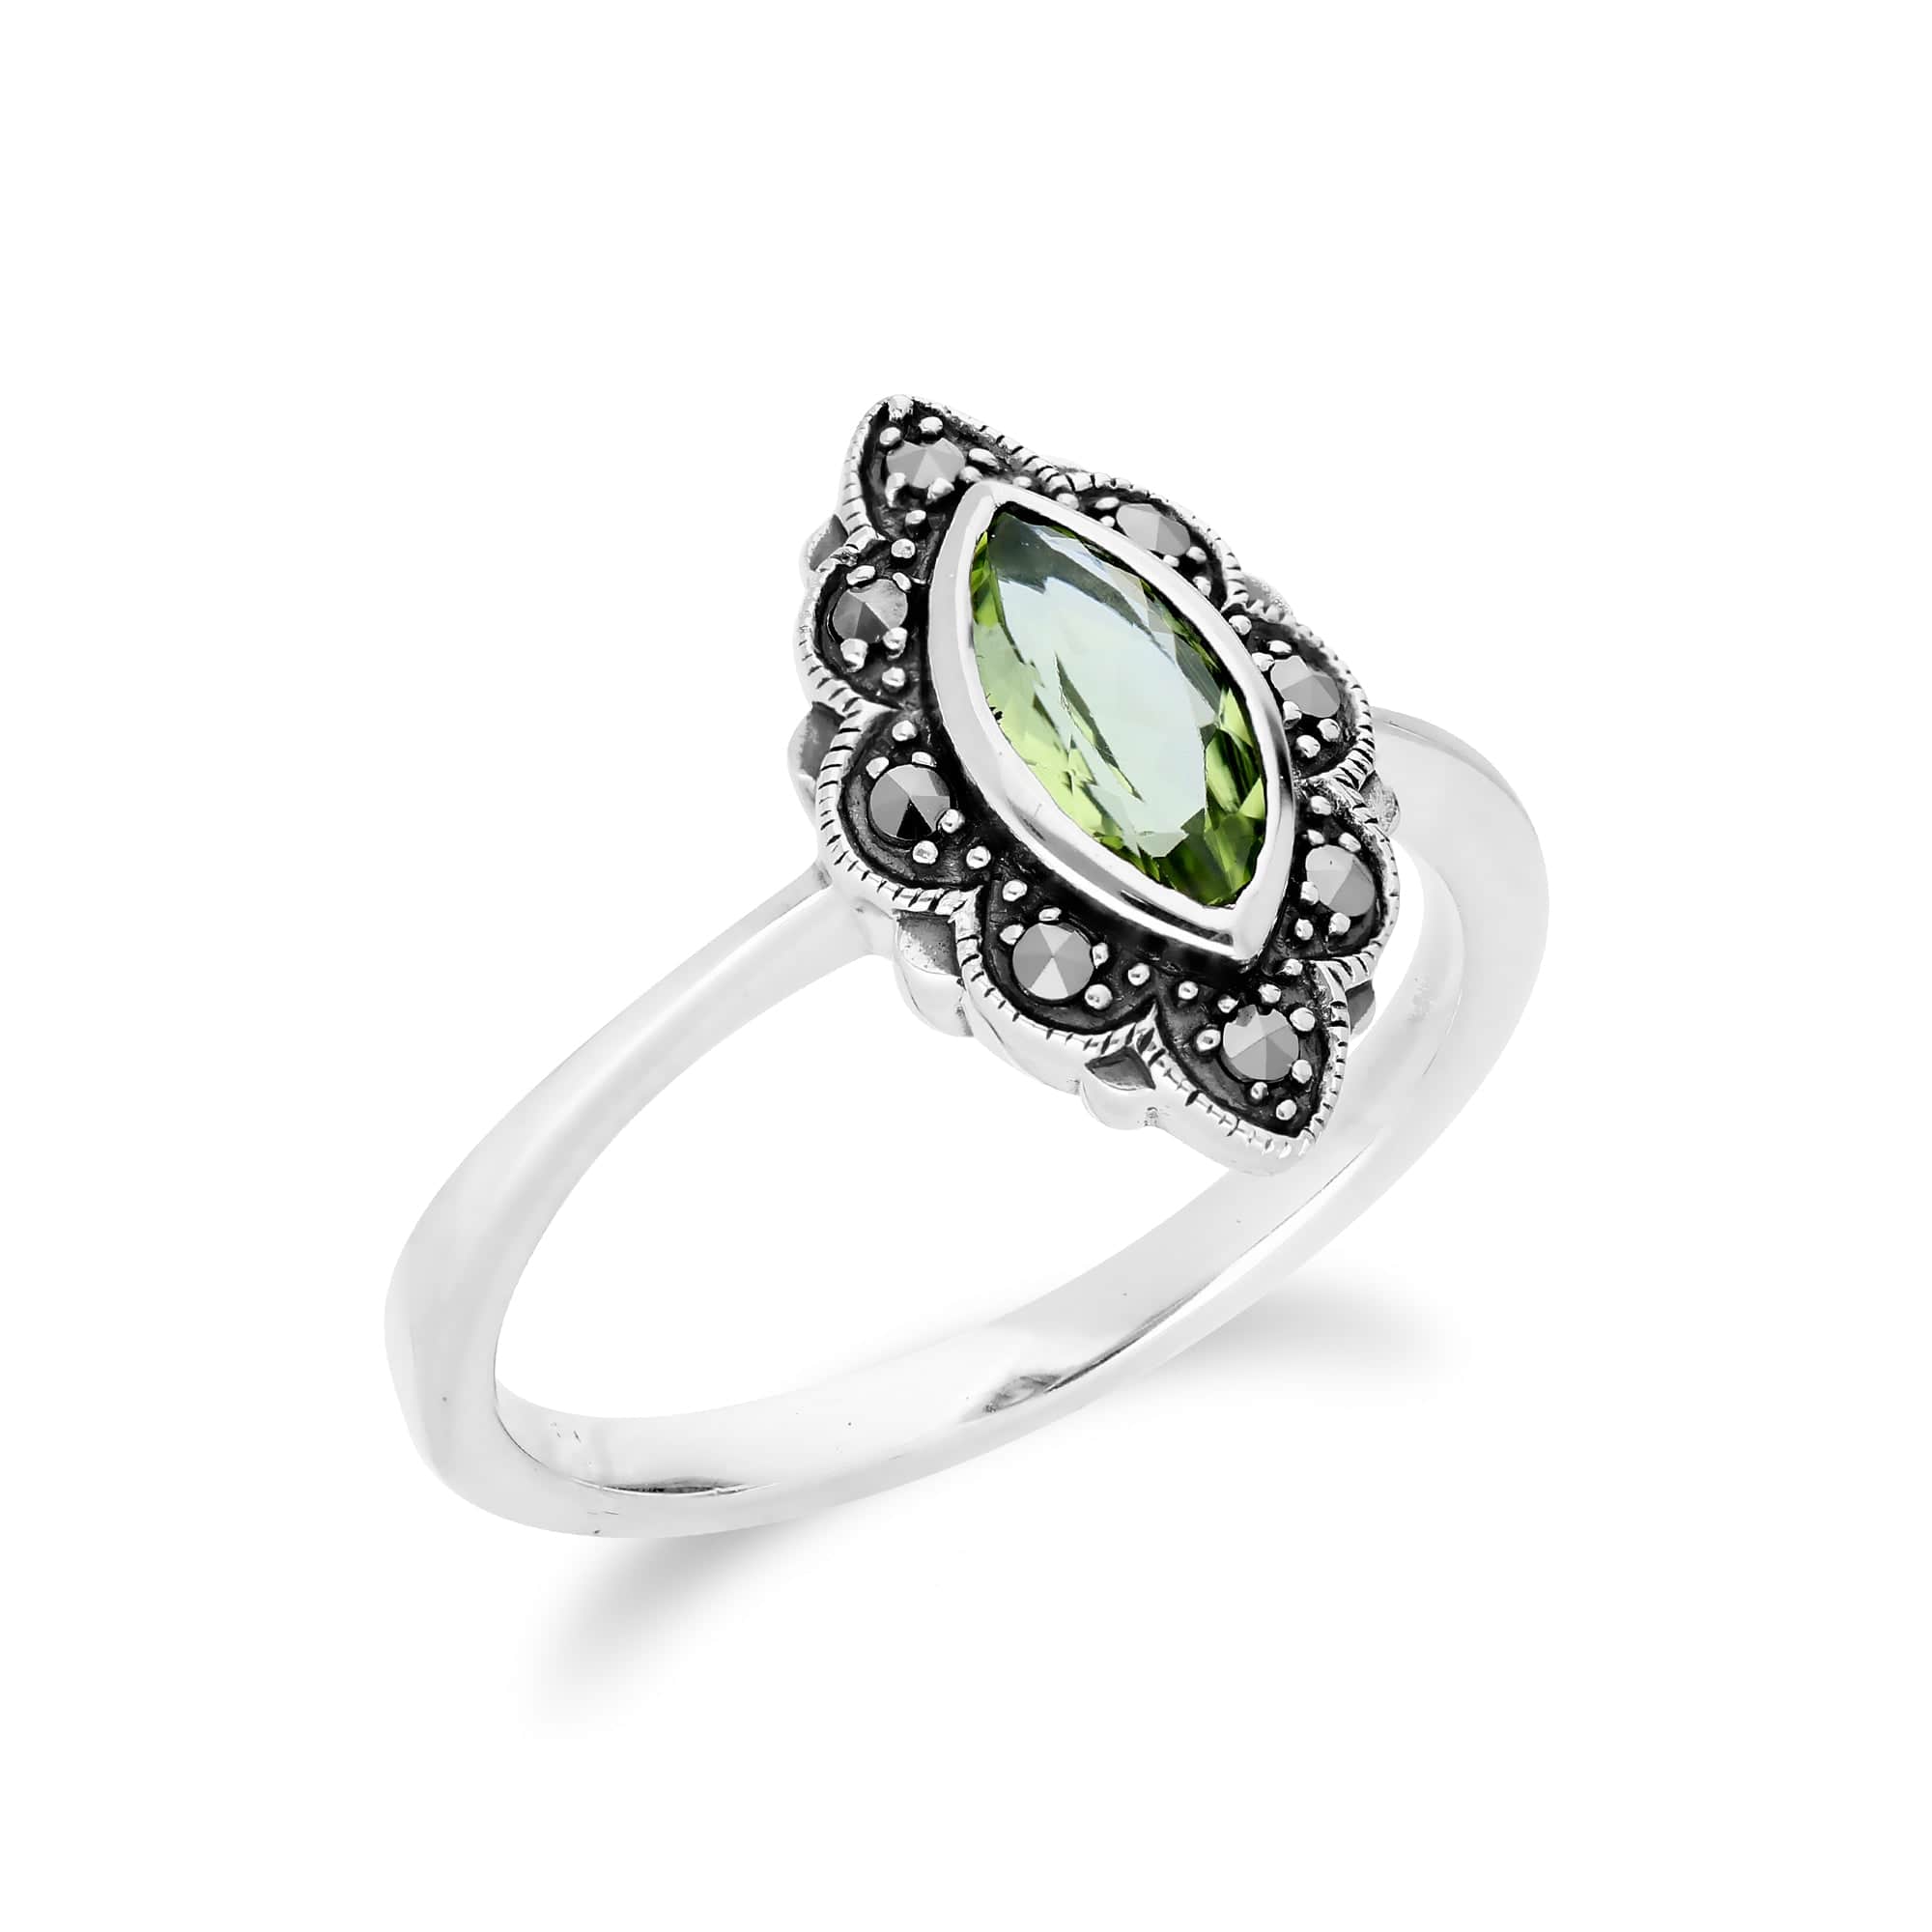 214R597203925 Art Nouveau  Marquise Peridot & Marcasite Leaf Ring in 925 Sterling Silver 2